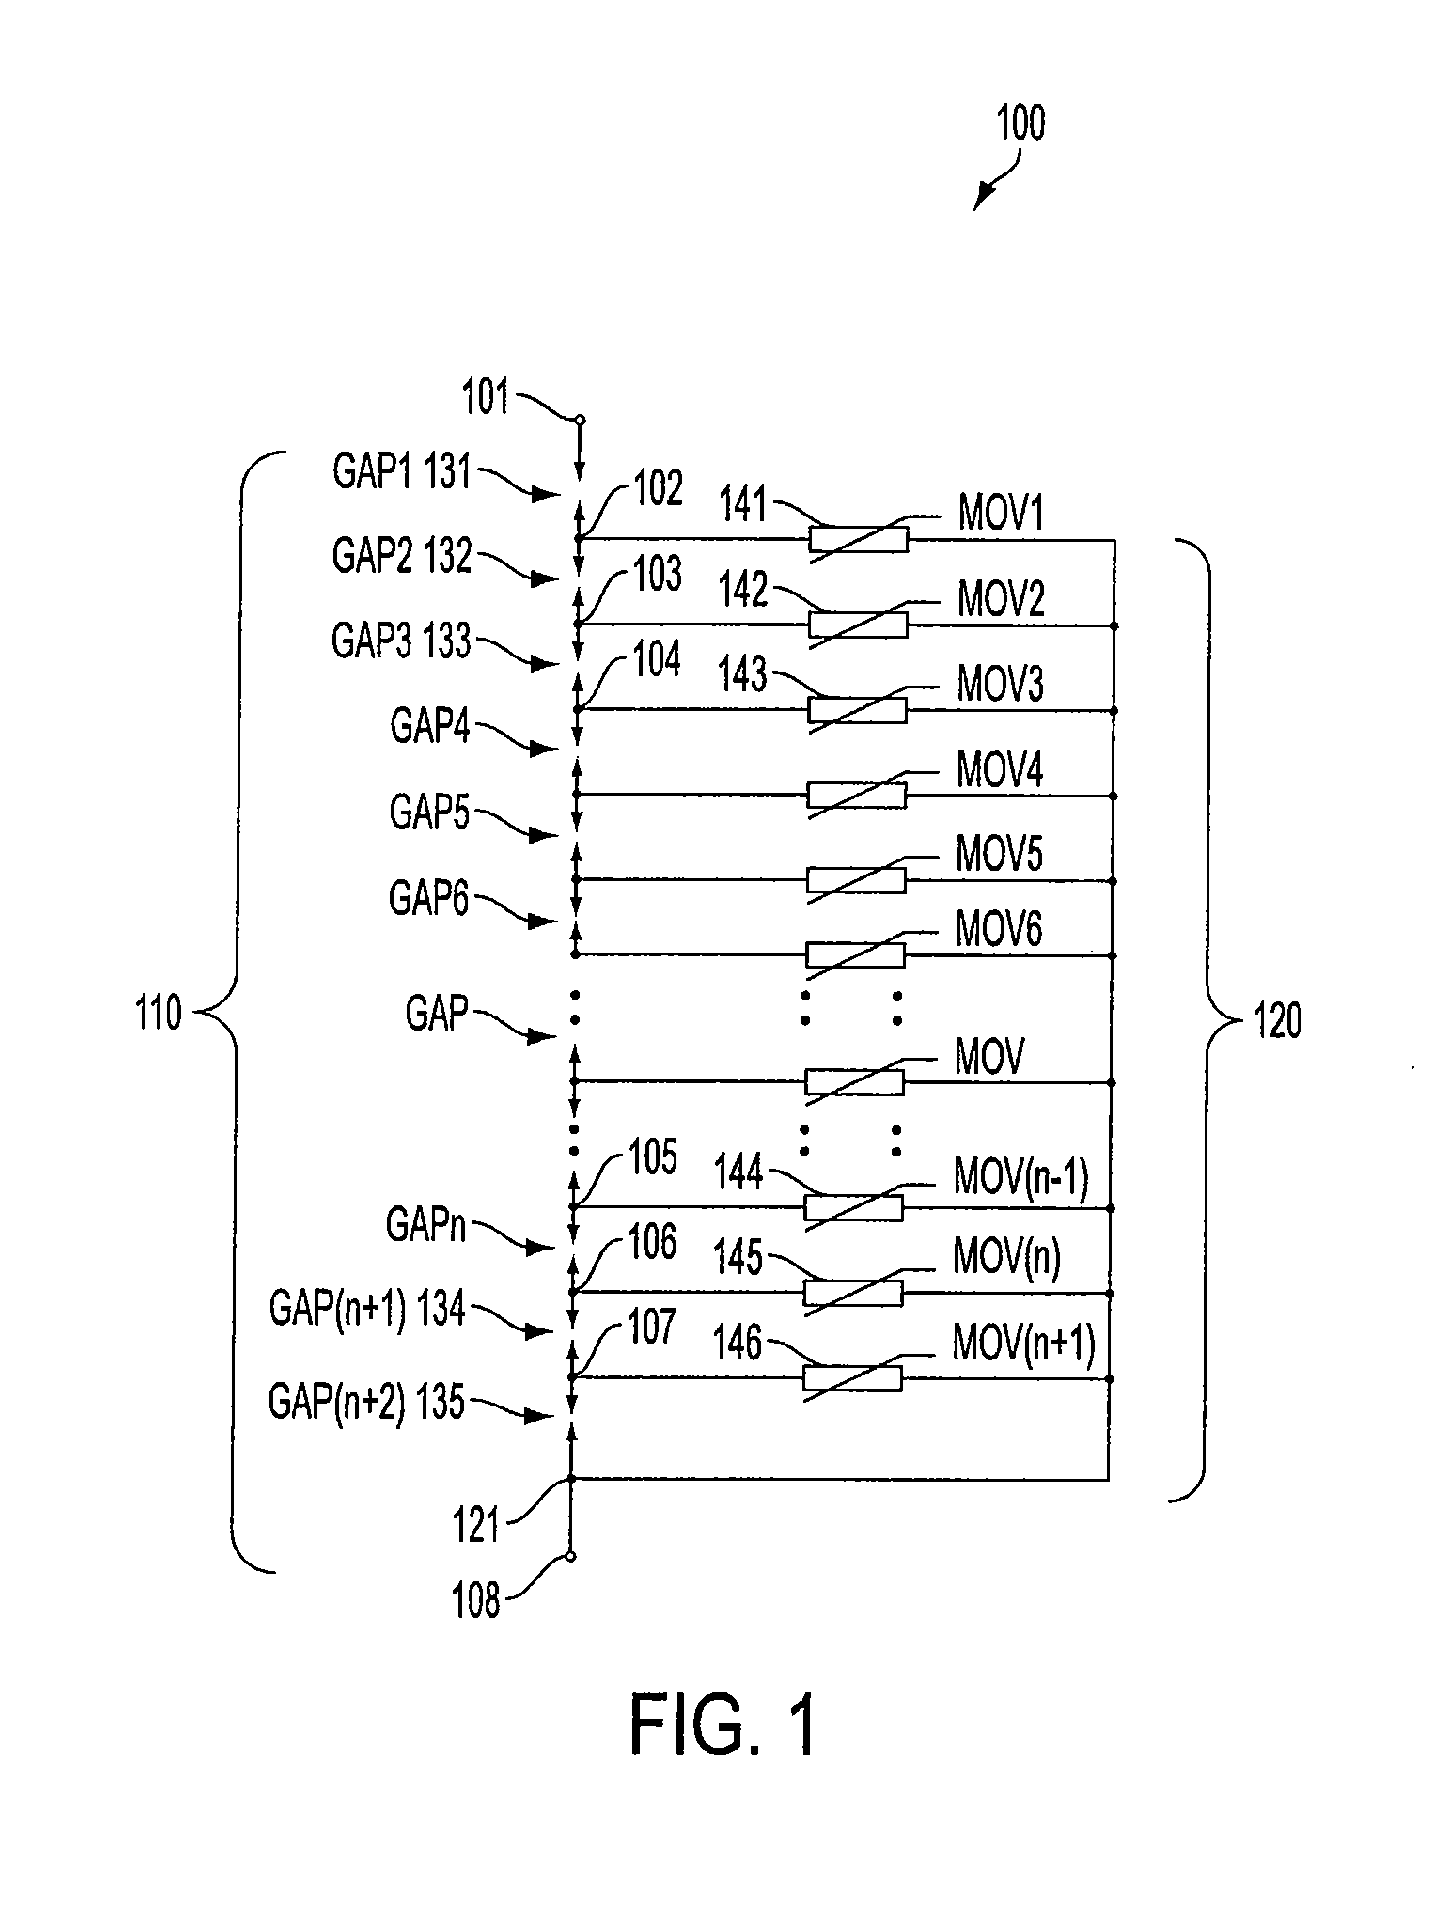 SURGE PROTECTION DEVICE USING METAL OXIDE VARISTORS (MOVs) AS THE ACTIVE ENERGY CONTROL MULTIPLE GAP DISCHARGING CHAIN